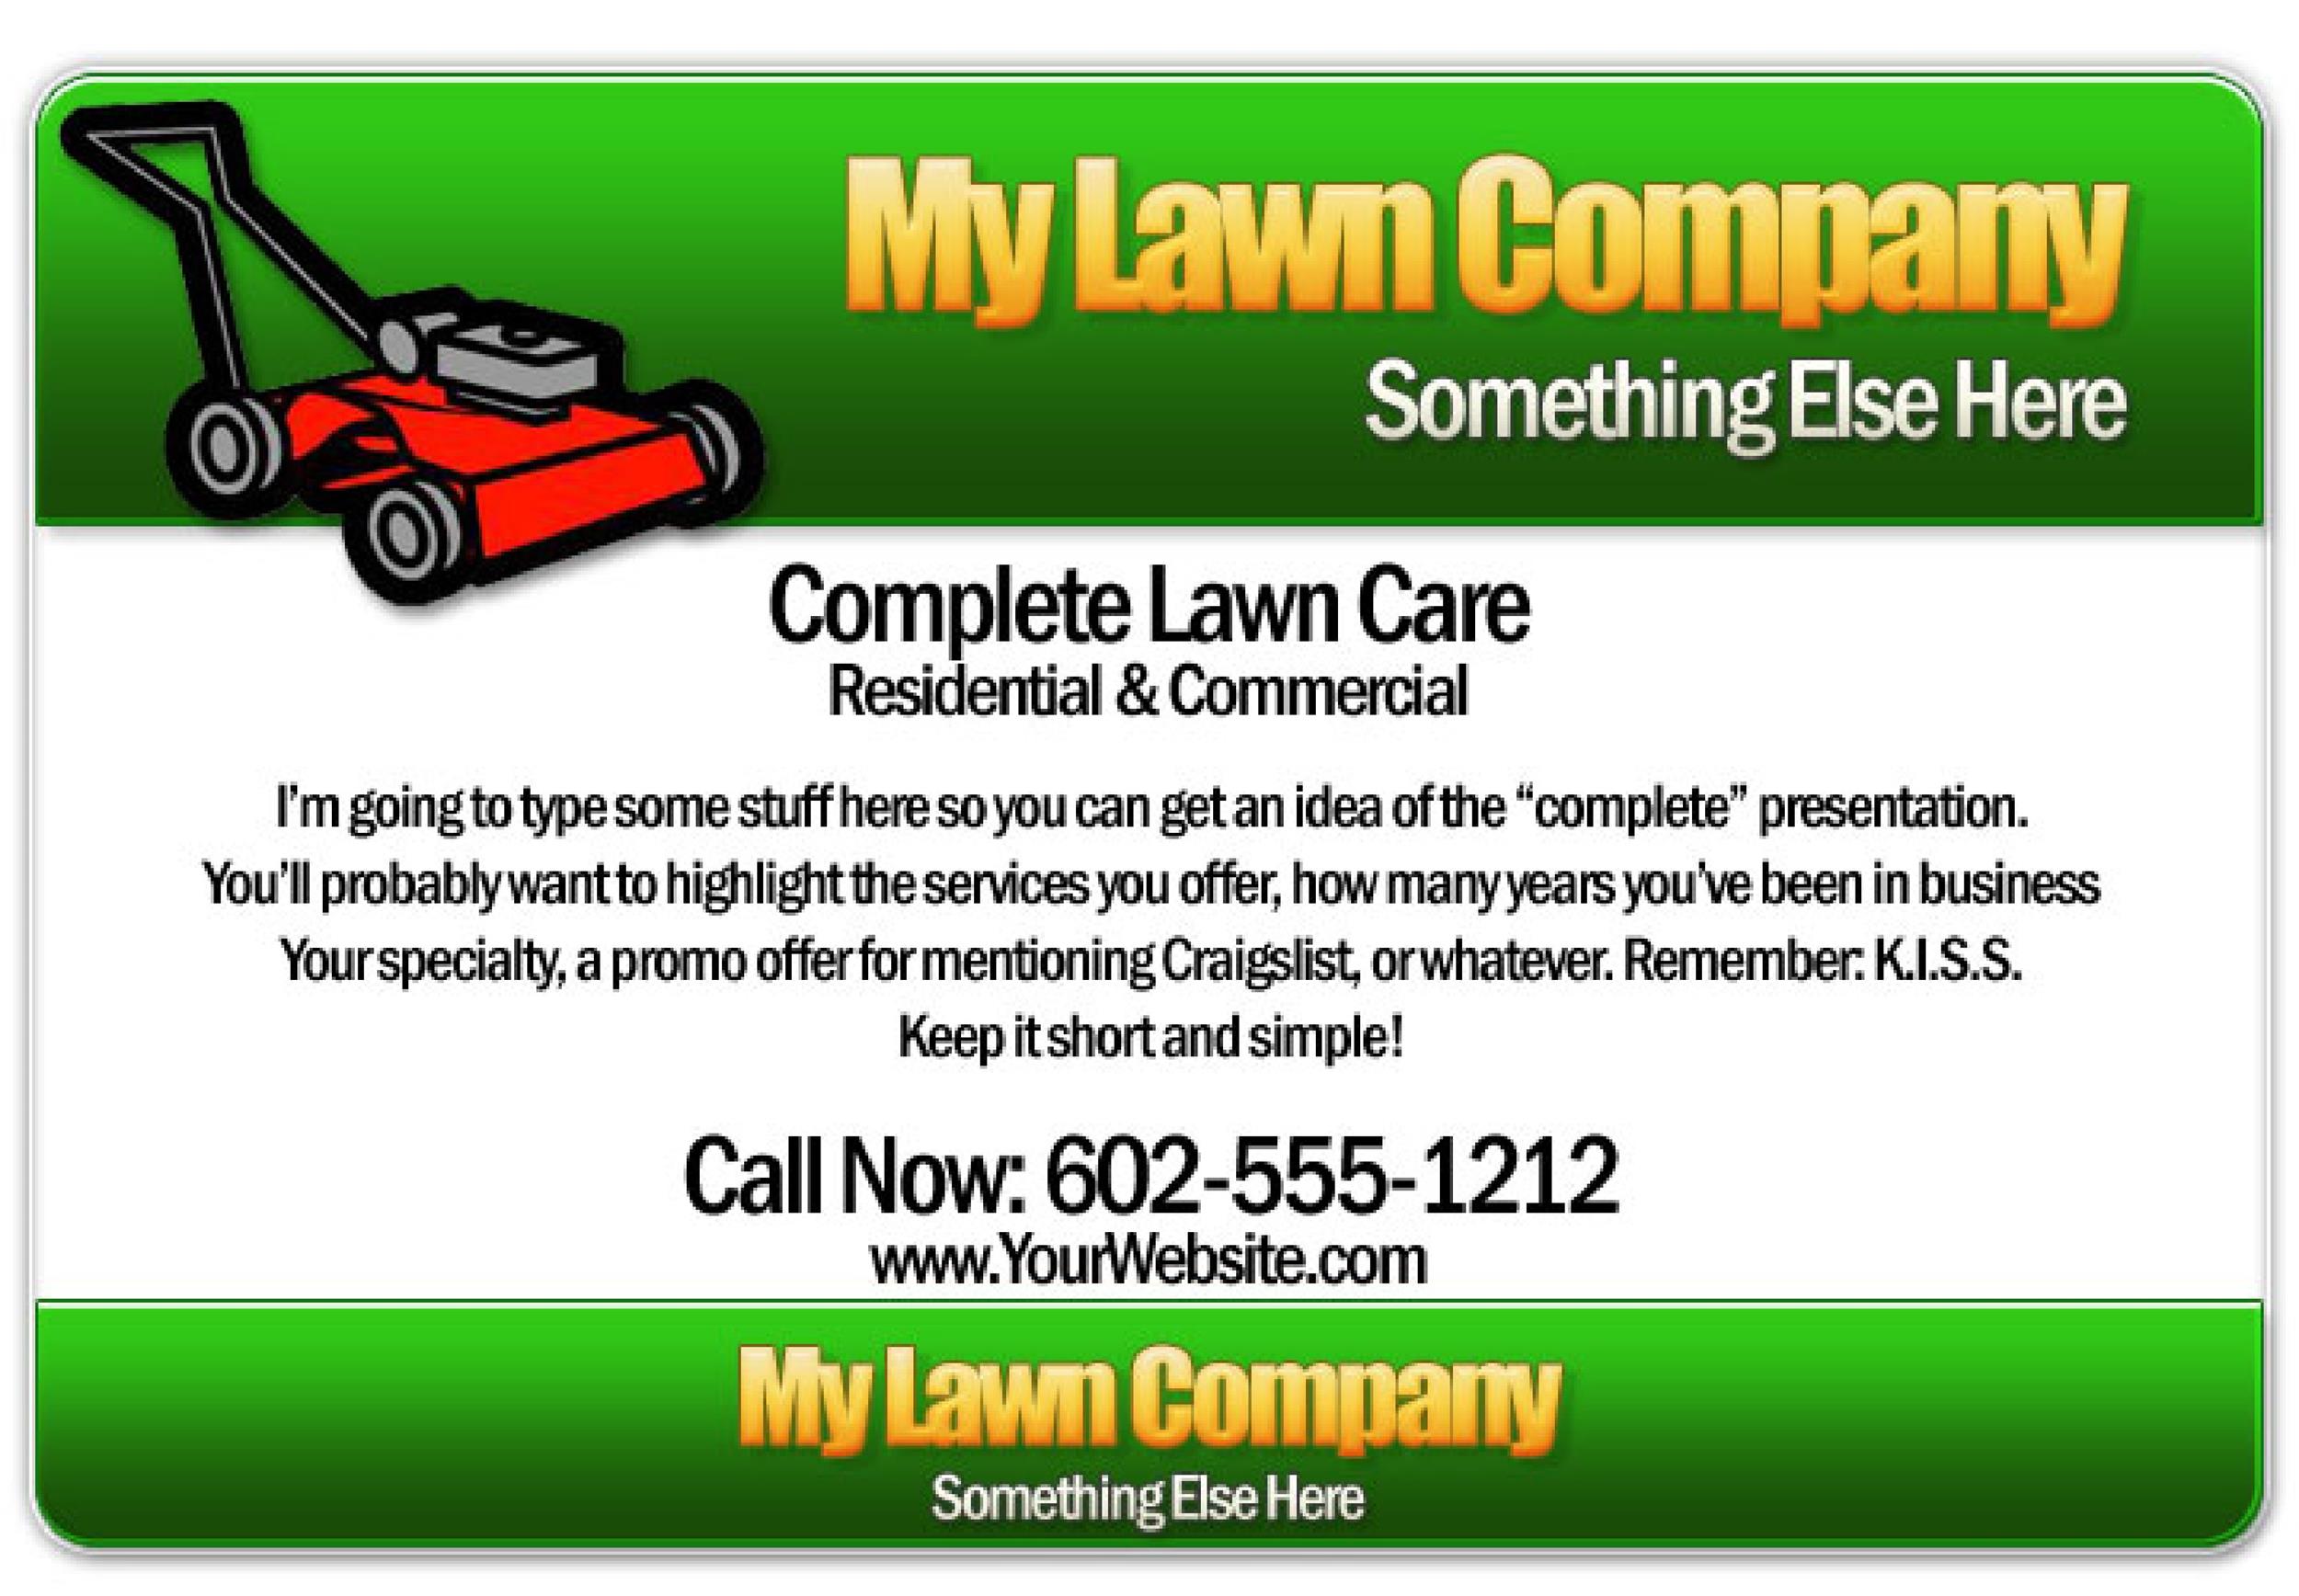 30 Free Lawn Care Flyer Templates Lawn Mower Flyers ᐅ TemplateLab